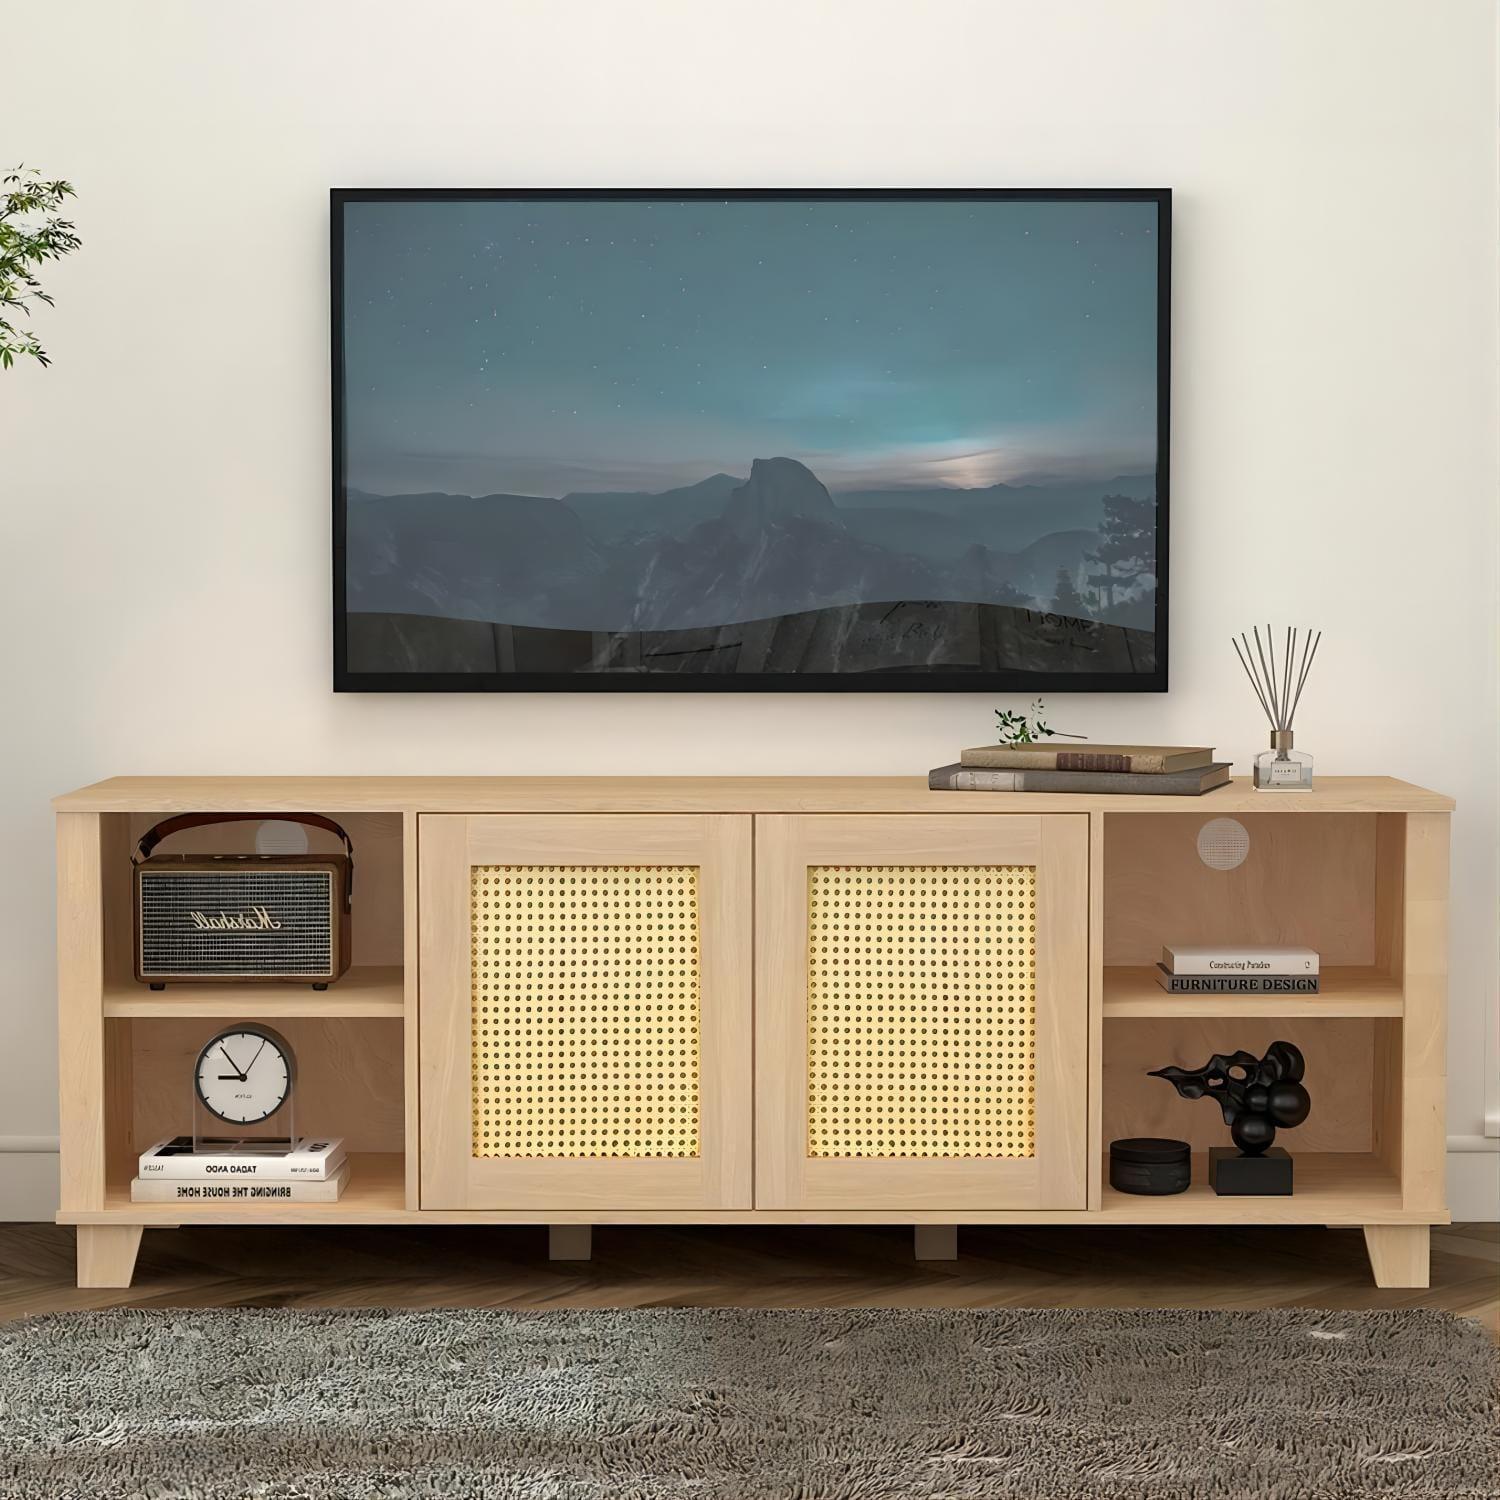 Shop 64.4" Rattan TV Stand for 65/70 inch TV Living Room Storage Console Entertainment Center,2 open doors Mademoiselle Home Decor